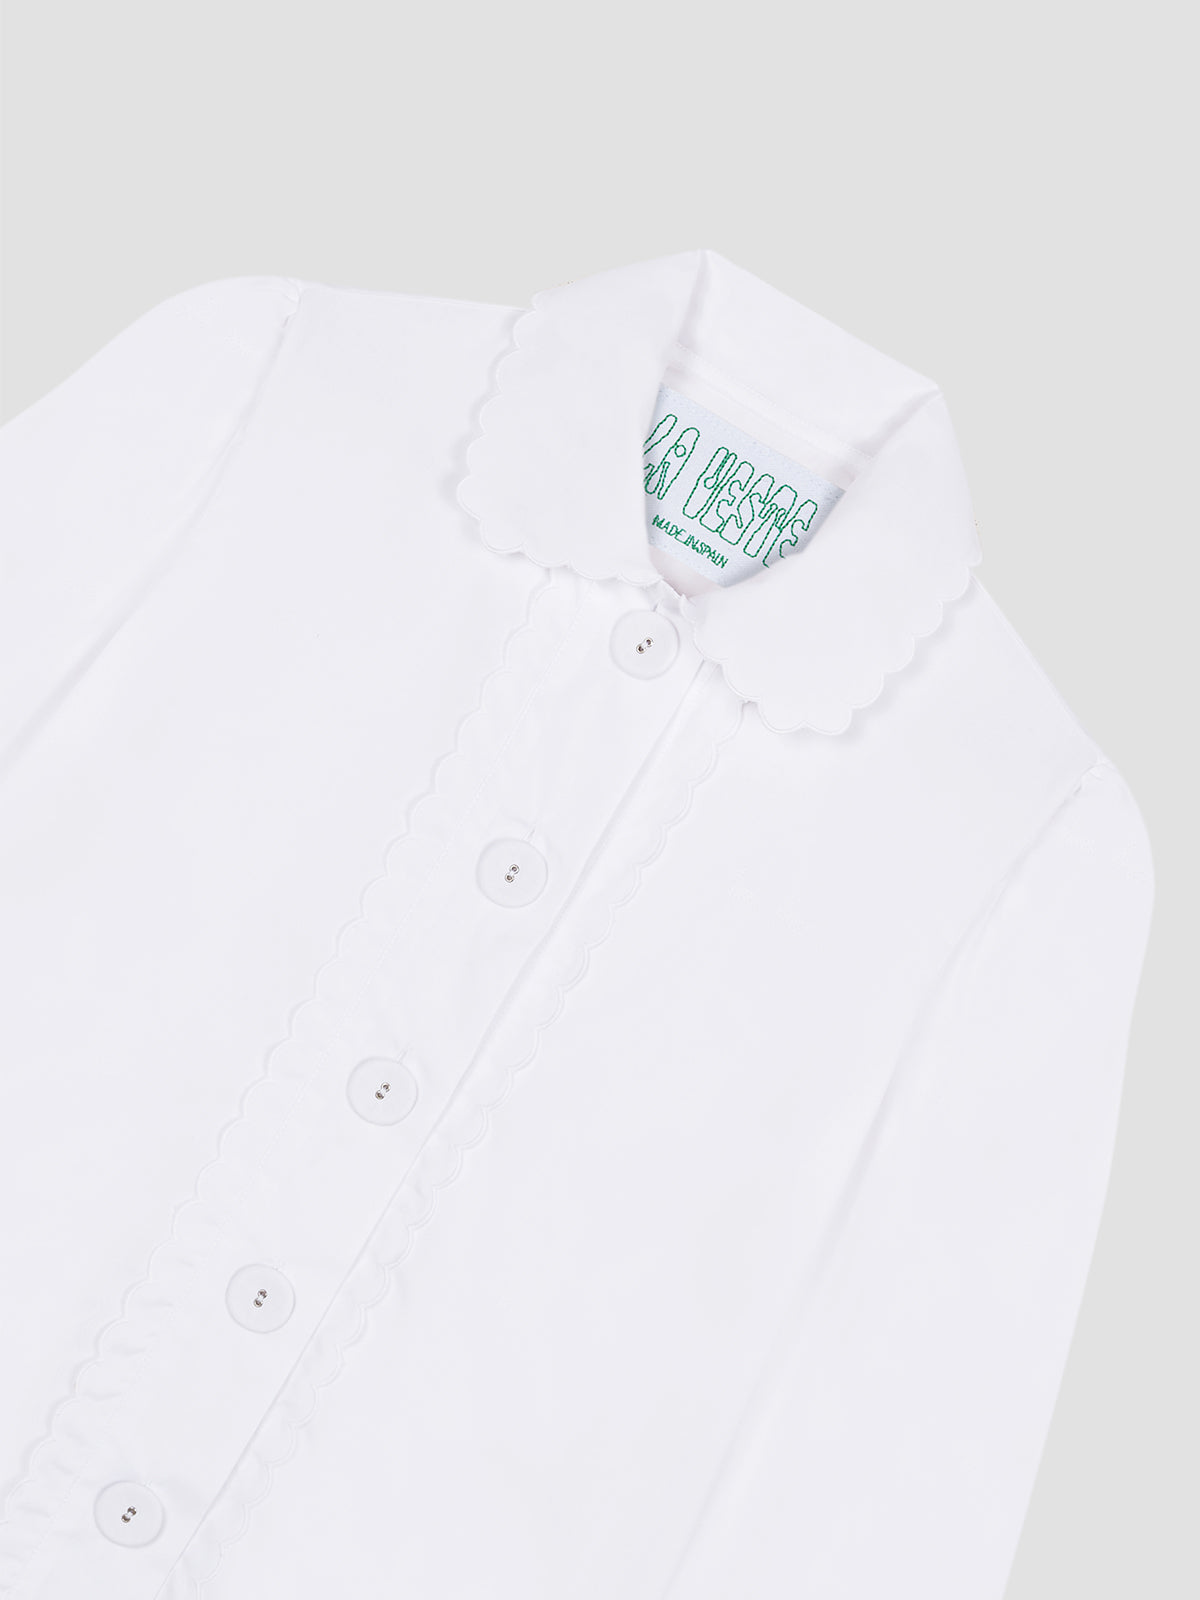 Shirt made of white cotton with lace details on the front, collar and cuffs